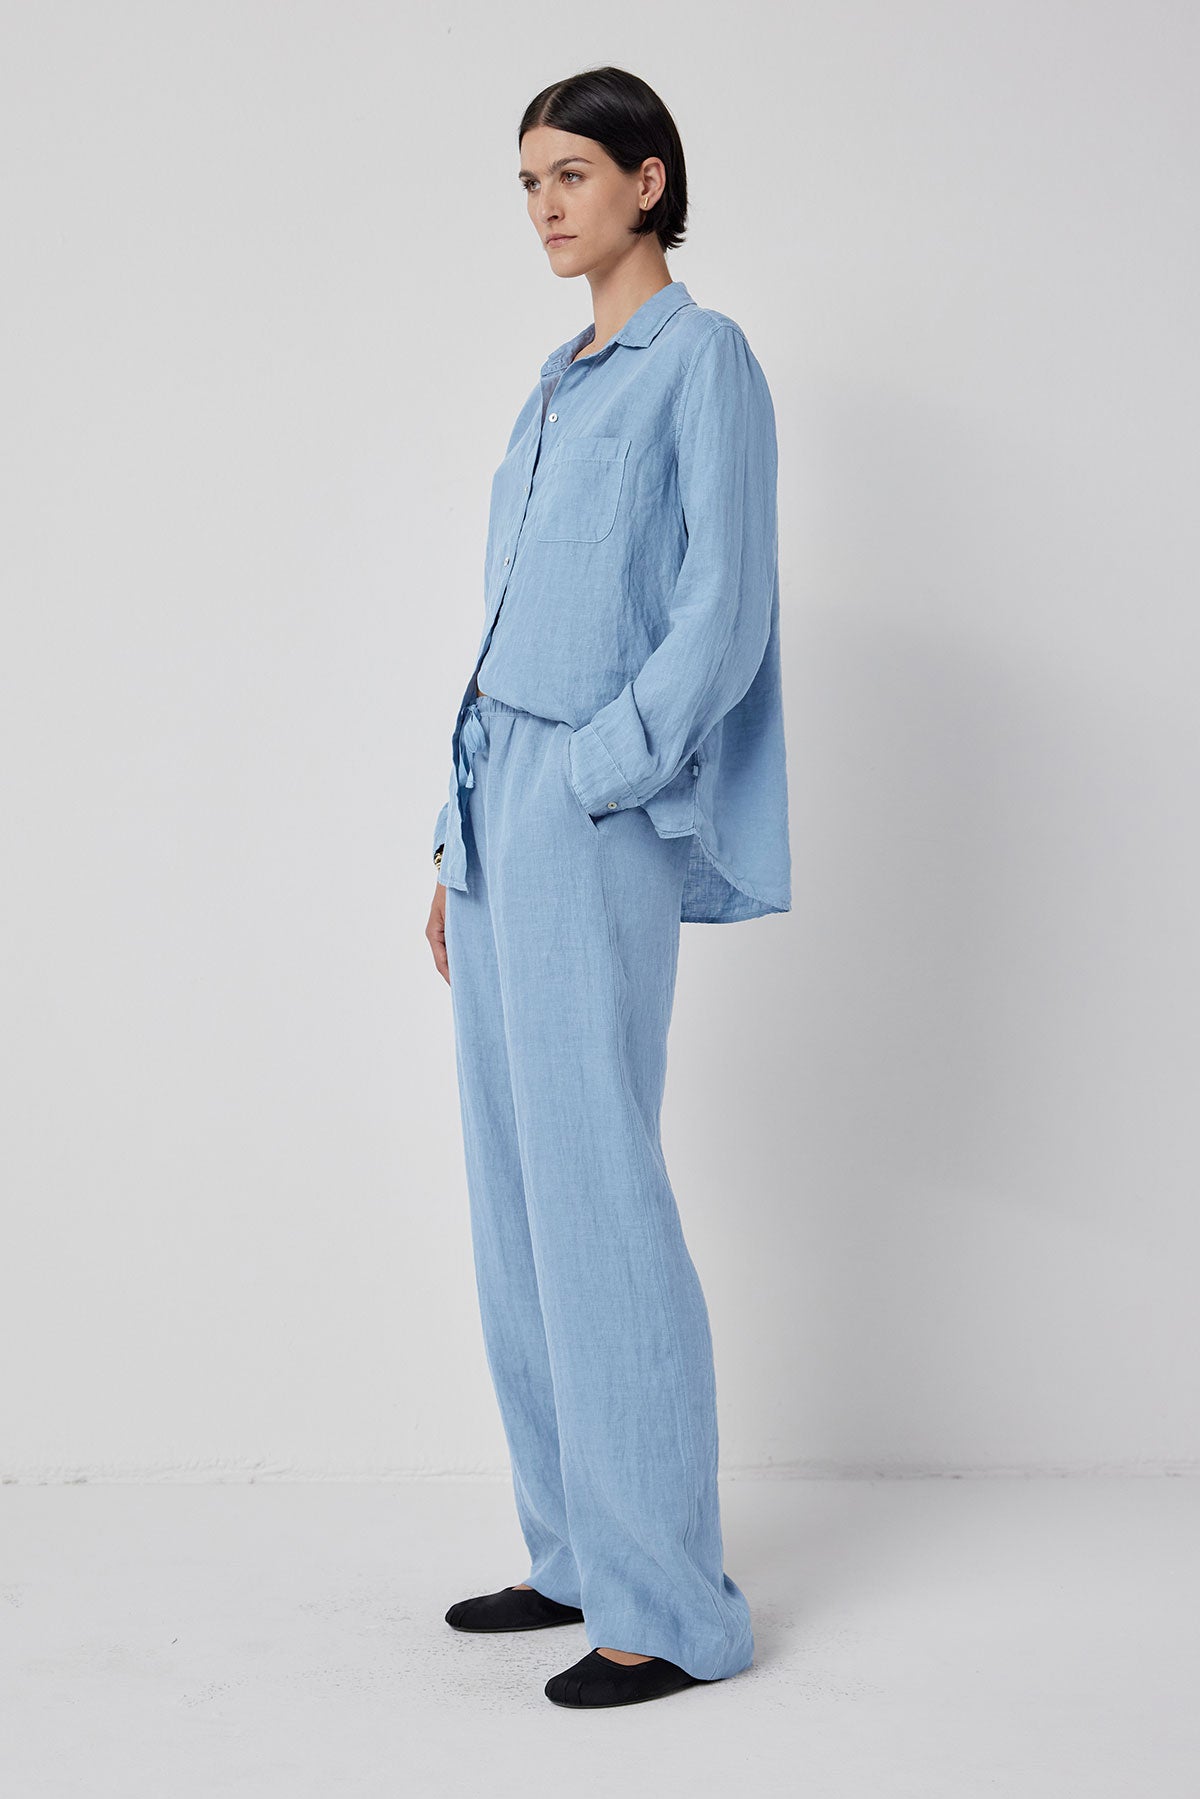 A woman standing and posing in a light blue linen shirt and matching PICO PANT trousers with an elastic waist drawstring against a white background by Velvet by Jenny Graham.-36212497907905